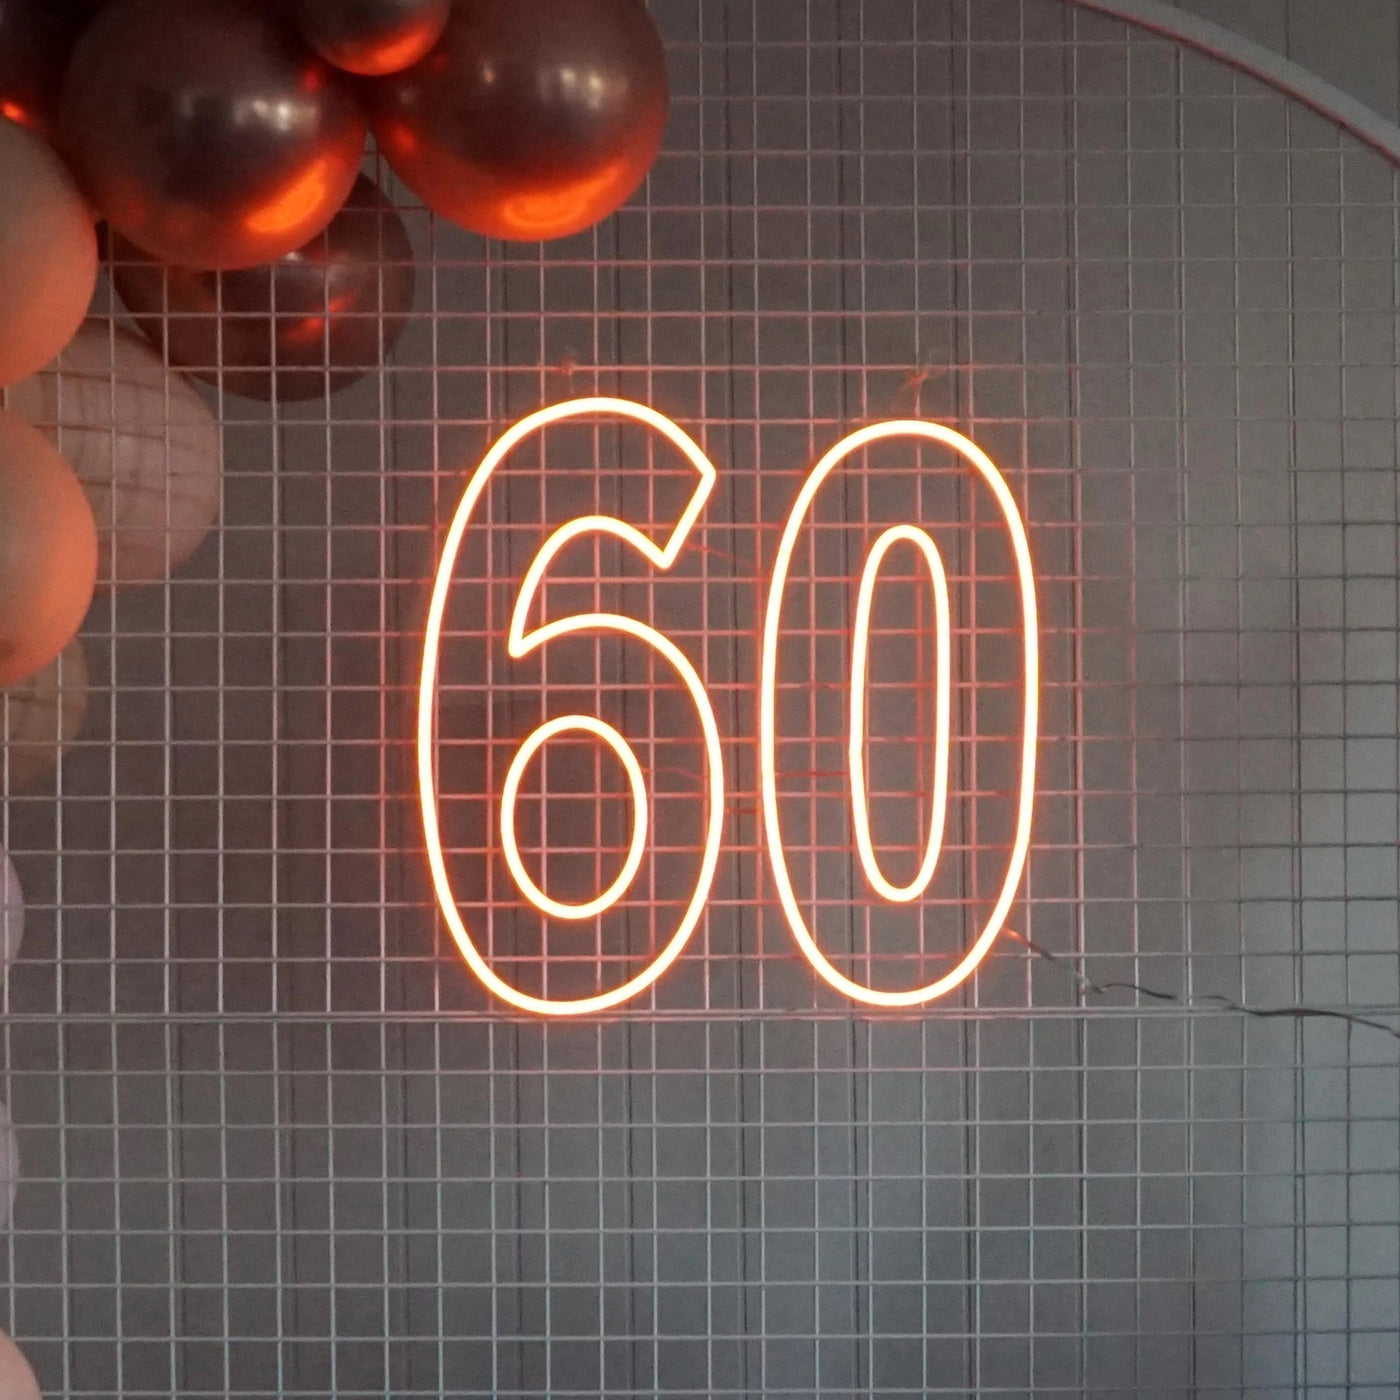 Sixty Years 60th Birthday Neon Signs Birthday Party Led Neon Lighting Decoration